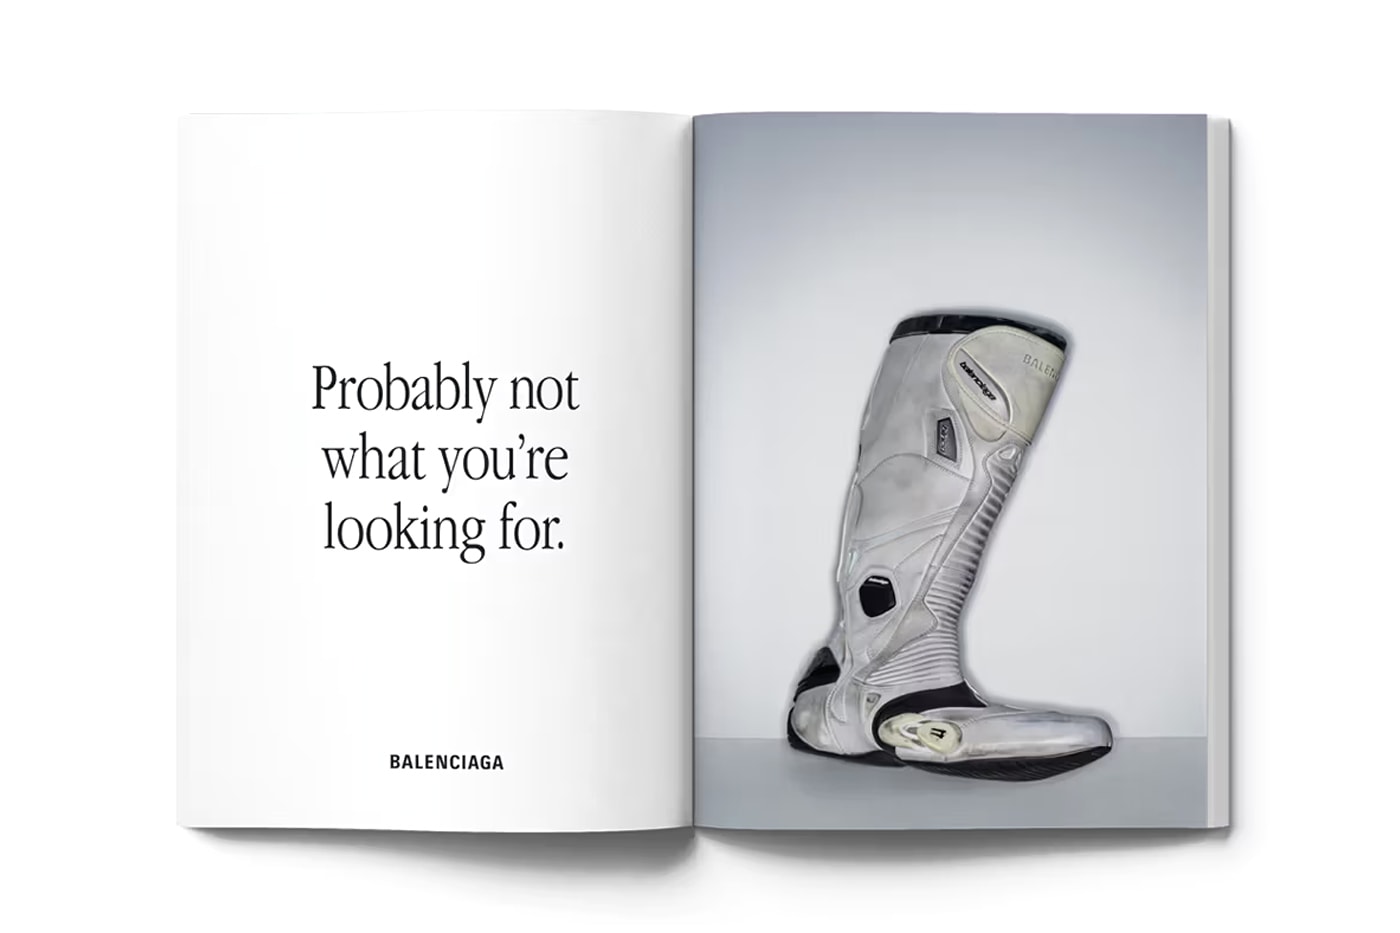 Balenciaga Delivers Tounge-in-Cheek "It's Different" Campaign